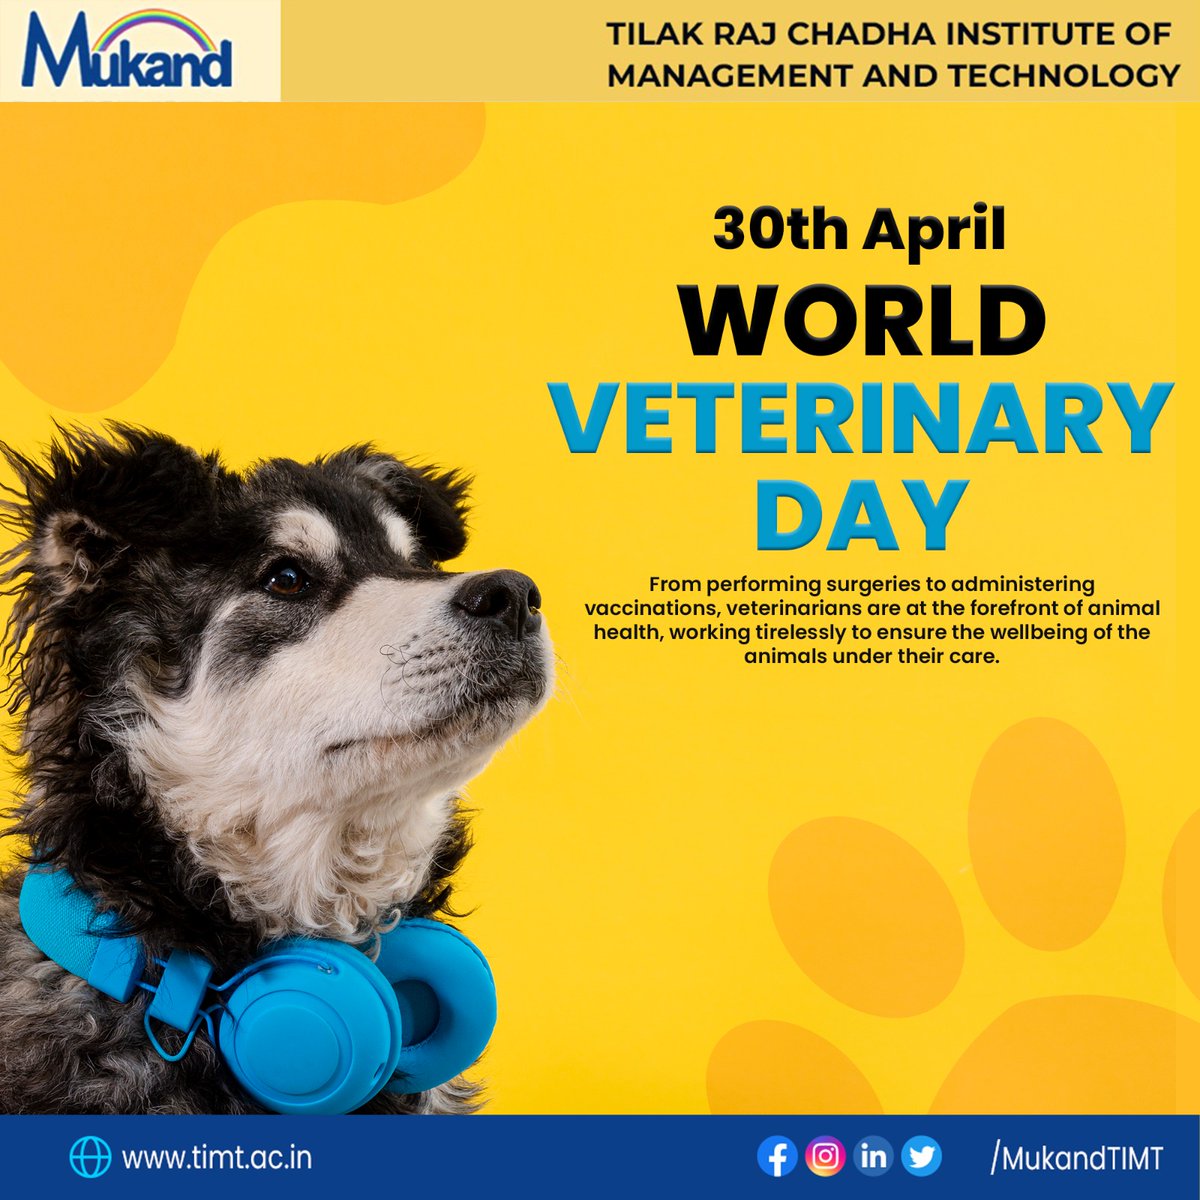 On World Veterinary Day, we honor the tireless efforts of veterinary professionals around the globe who work tirelessly to protect the health and welfare of animals.
#VeterinaryProfessionals #AnimalWelfare #WorldVeterinaryDay #TIMT